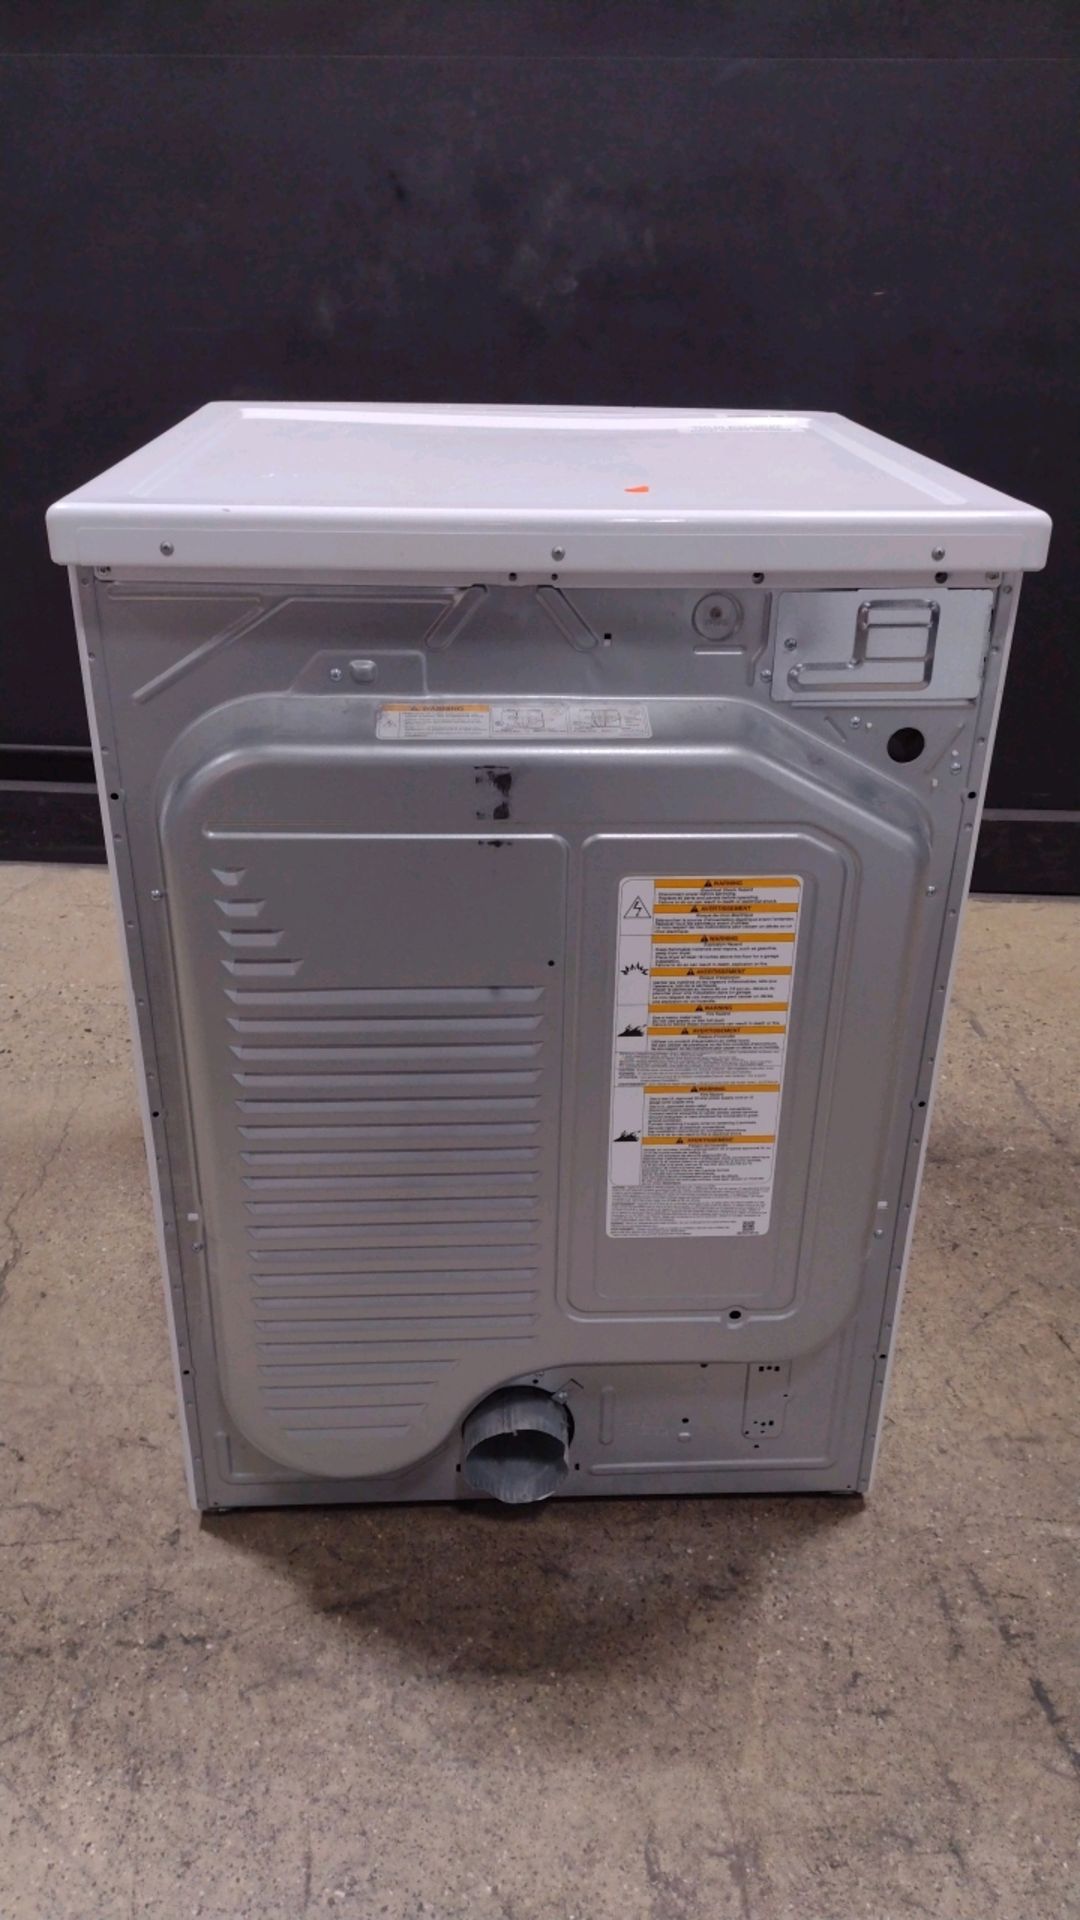 LG DLE3170W DRYER MACHINE (LOCATED AT 3325 MOUNT PROSPECT ROAD, FRANKLIN PARK, IL, 60131) - Image 3 of 3